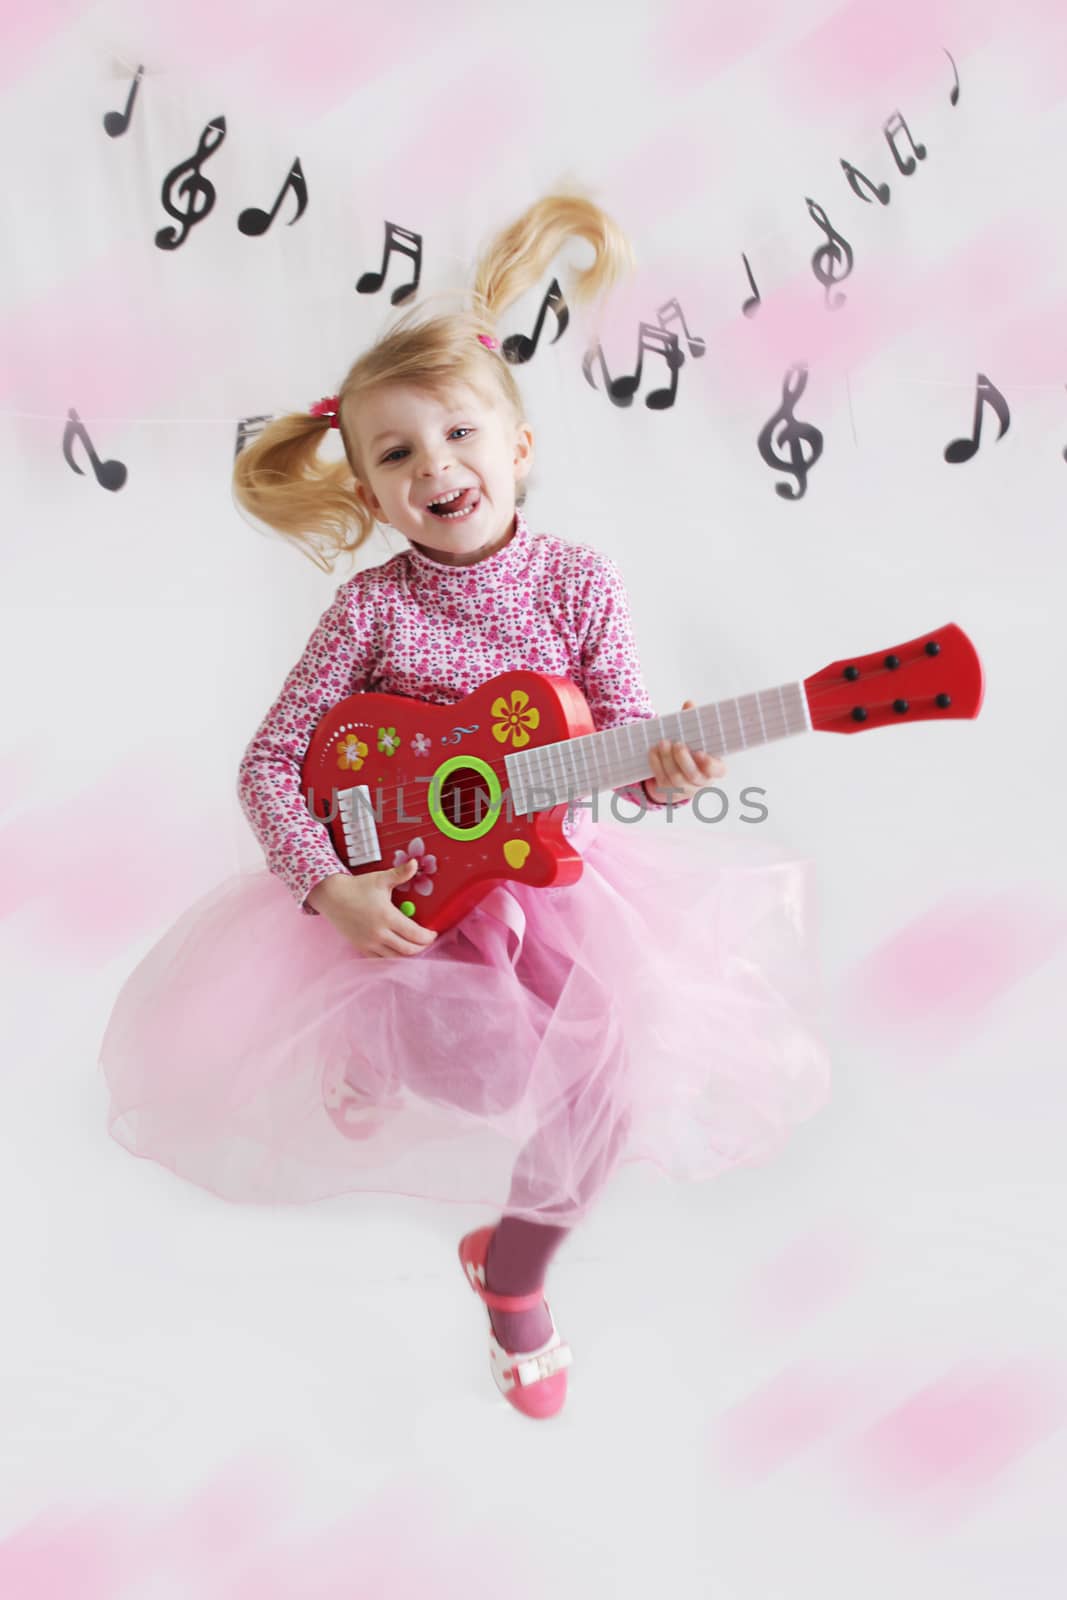 Girl with guitar on music notes background by Angel_a